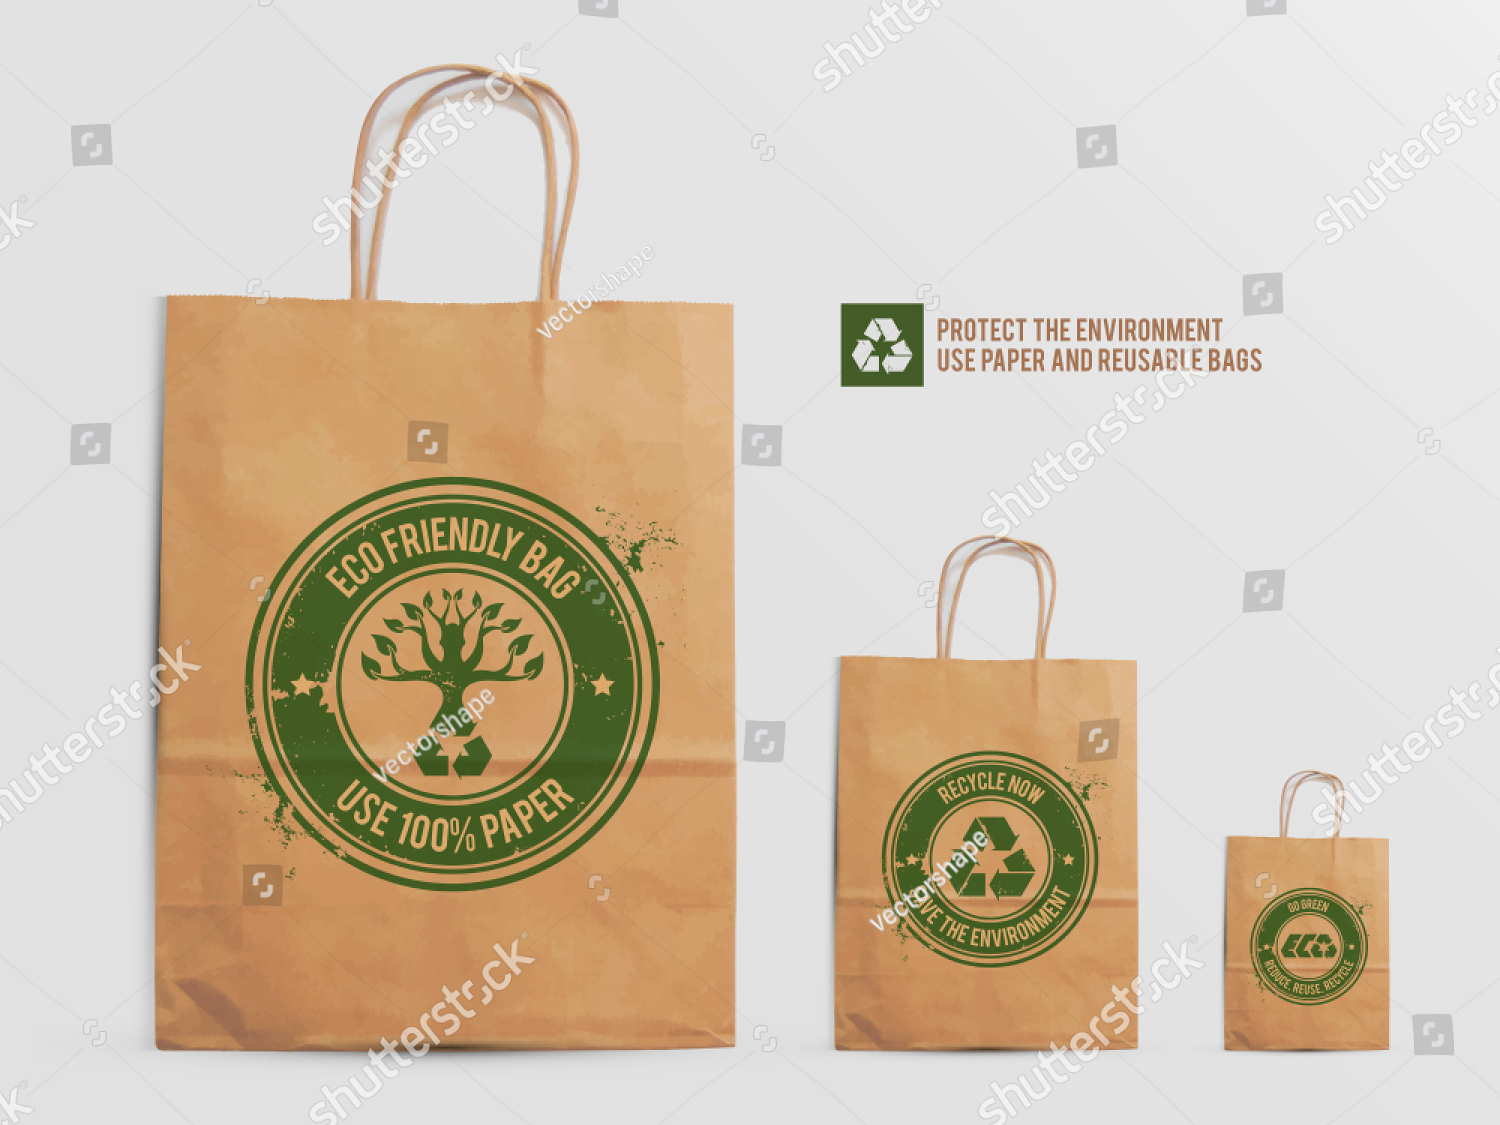 eco stamp style label presentation on paper bags by Vectorshape